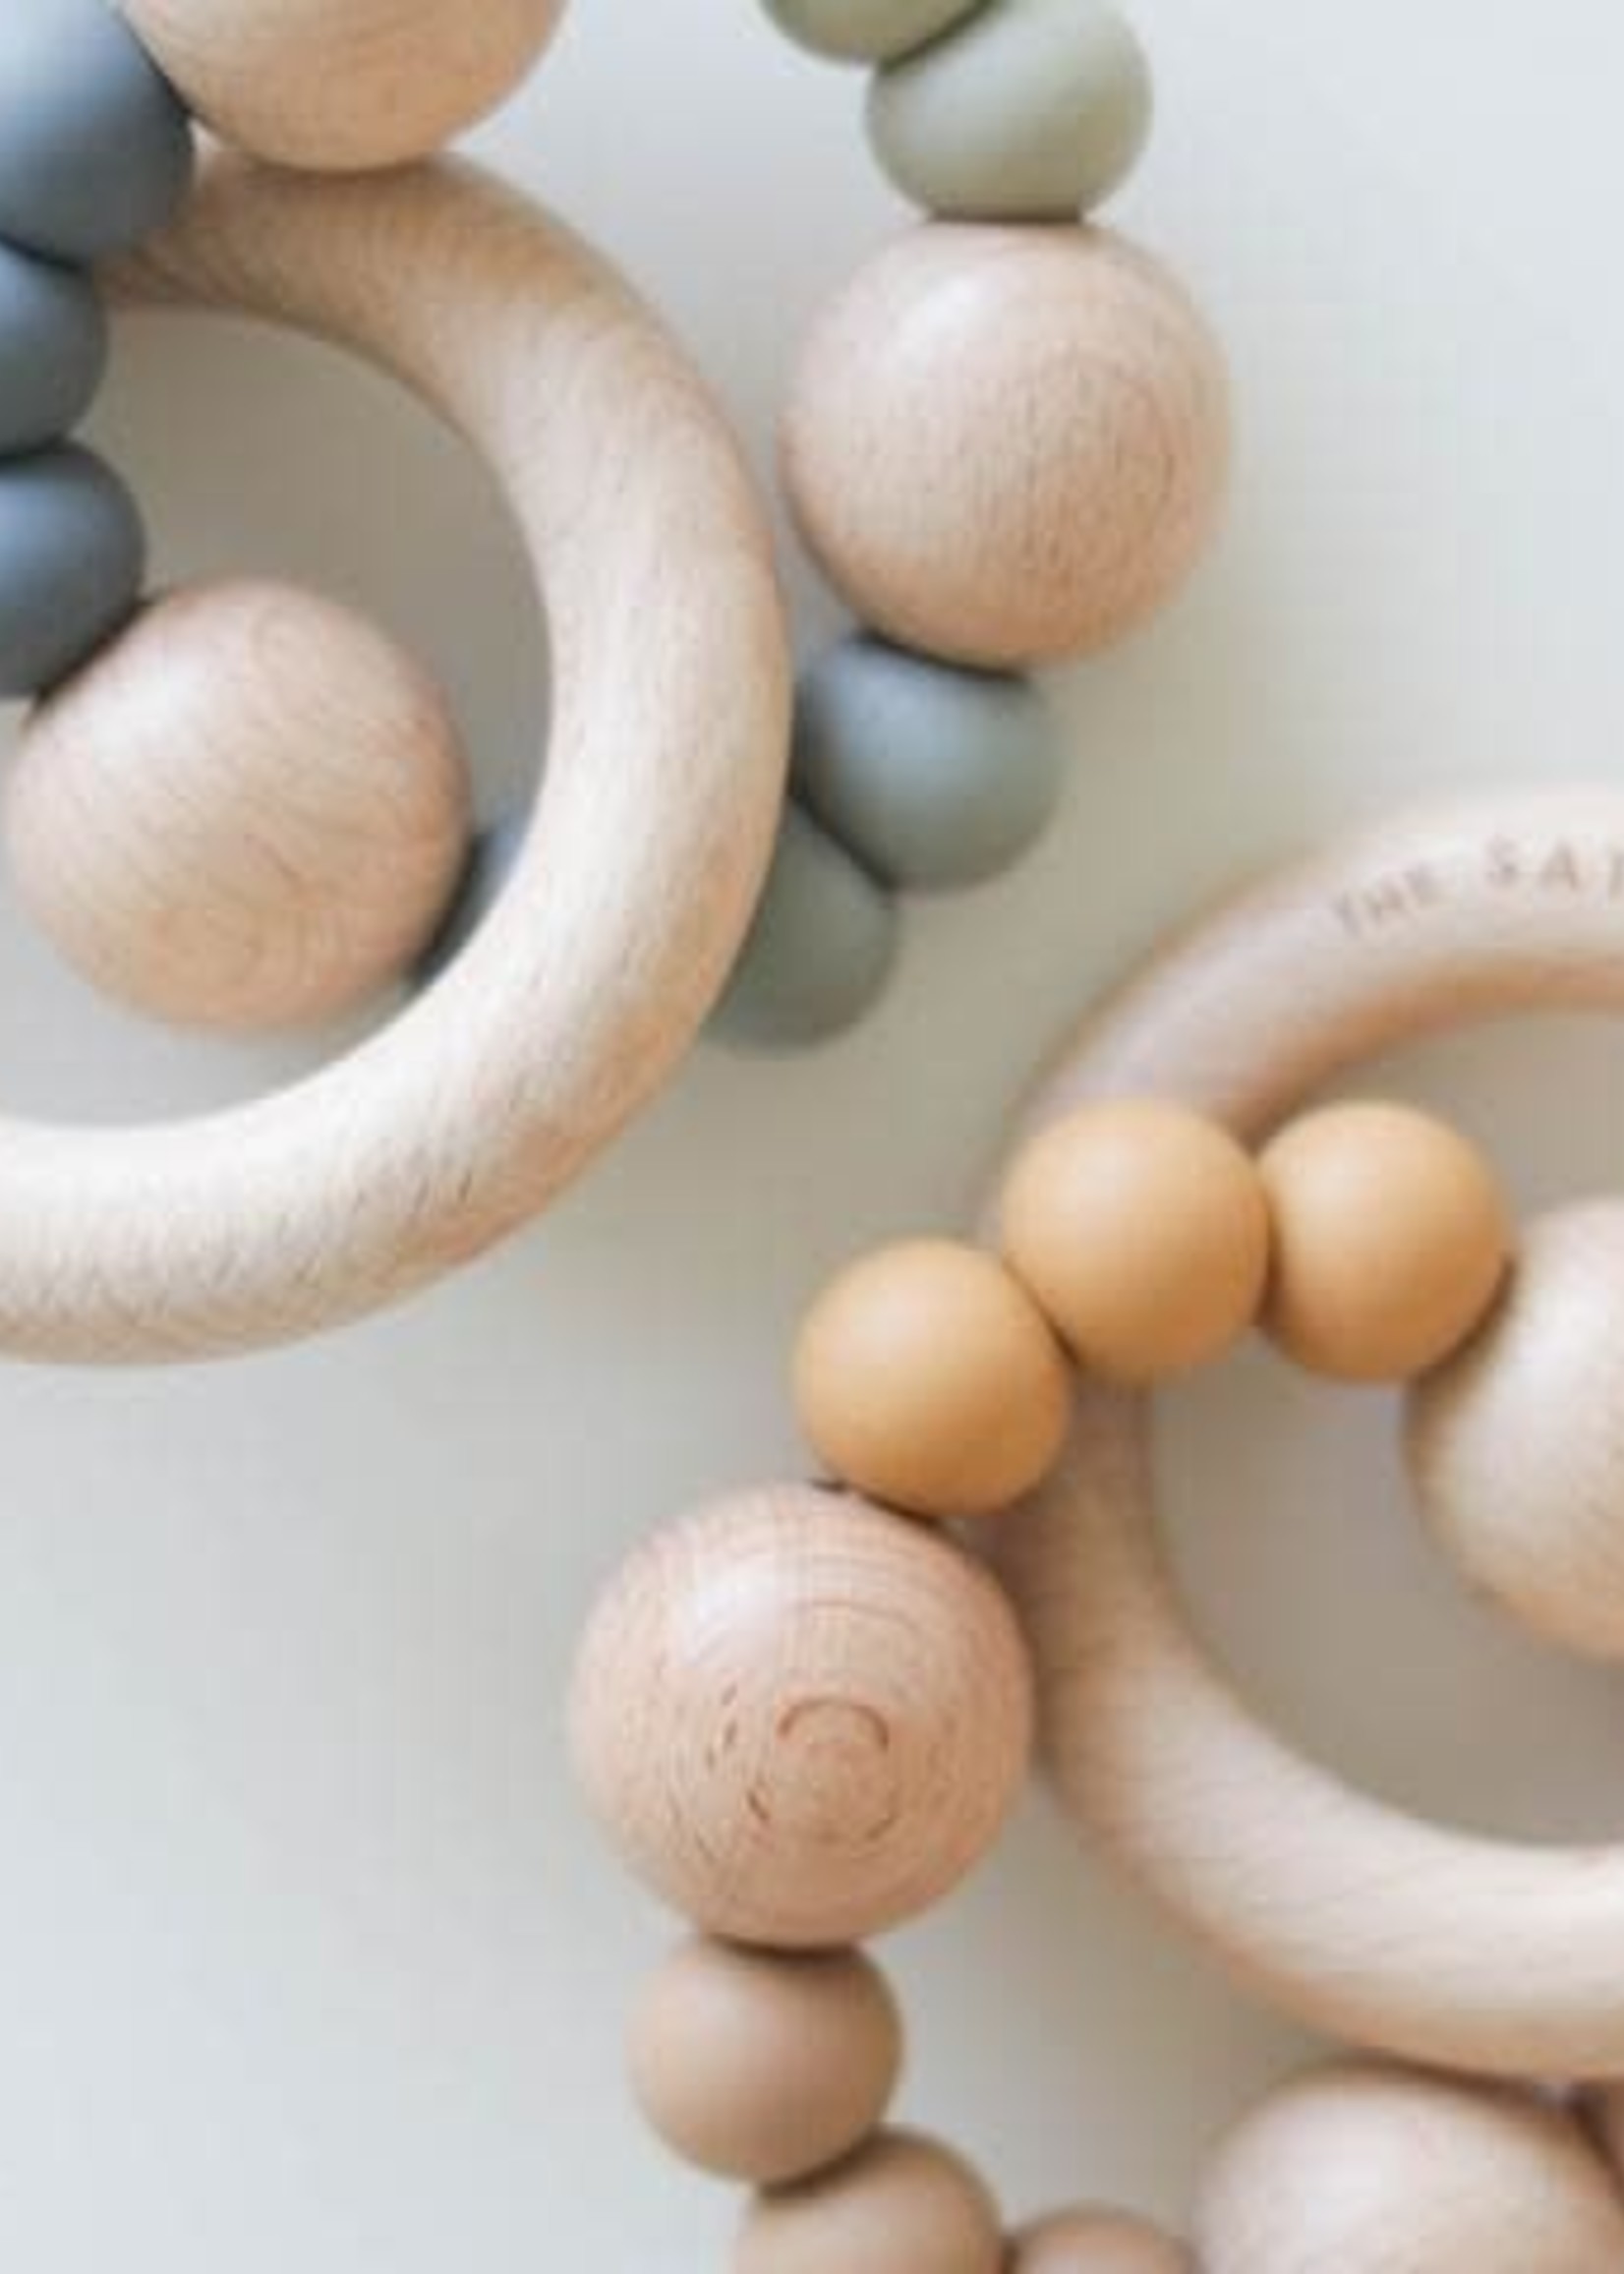 The SATURDAY Baby BABY Teethers